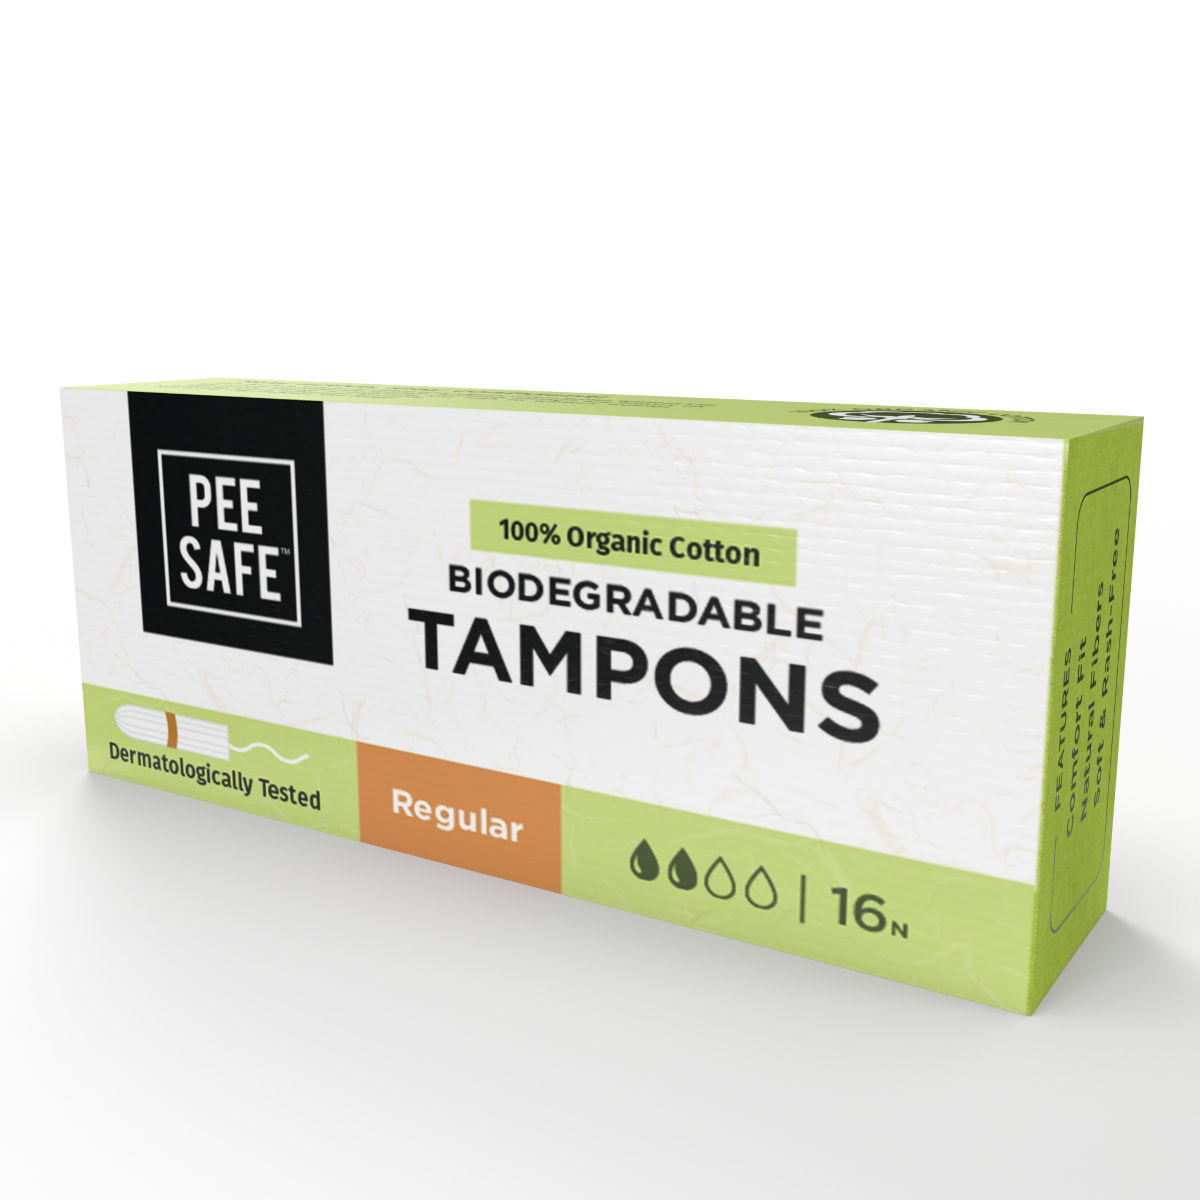 Pee Safe 100% Organic Cotton Biodegradable Regular Tampons, 16 Count, Pack of 1 